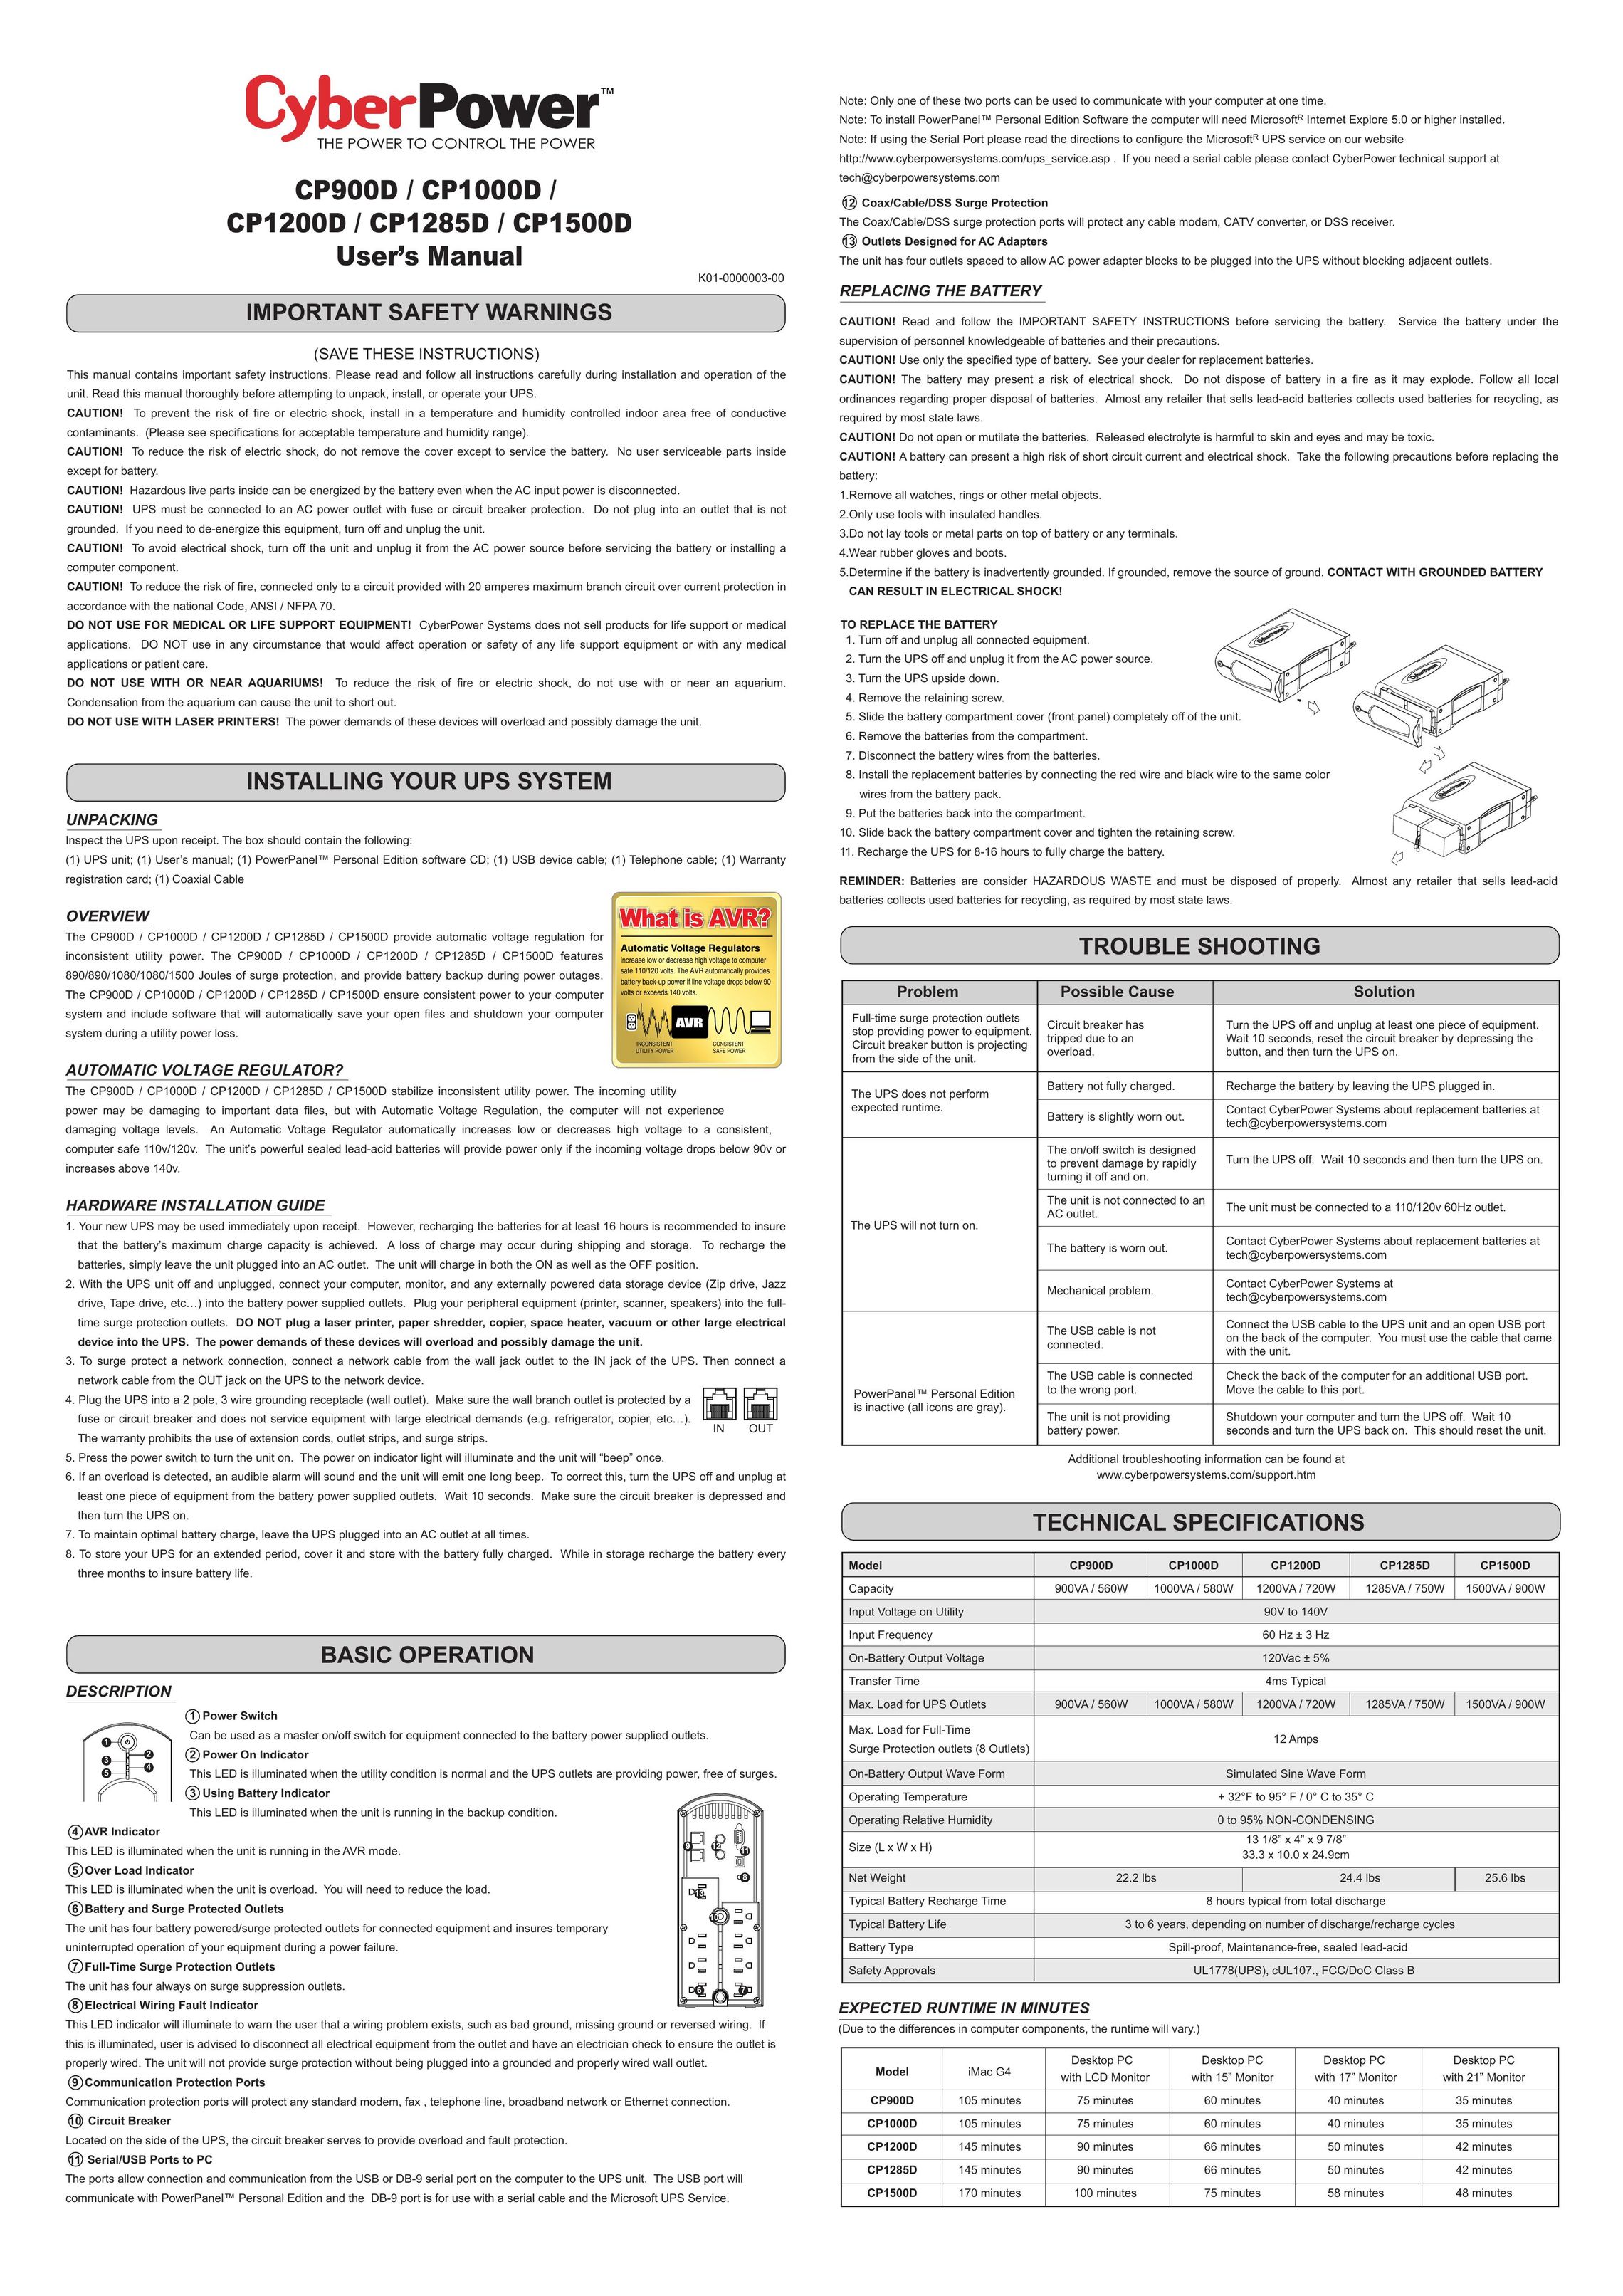 CyberPower CP1000D Power Supply User Manual